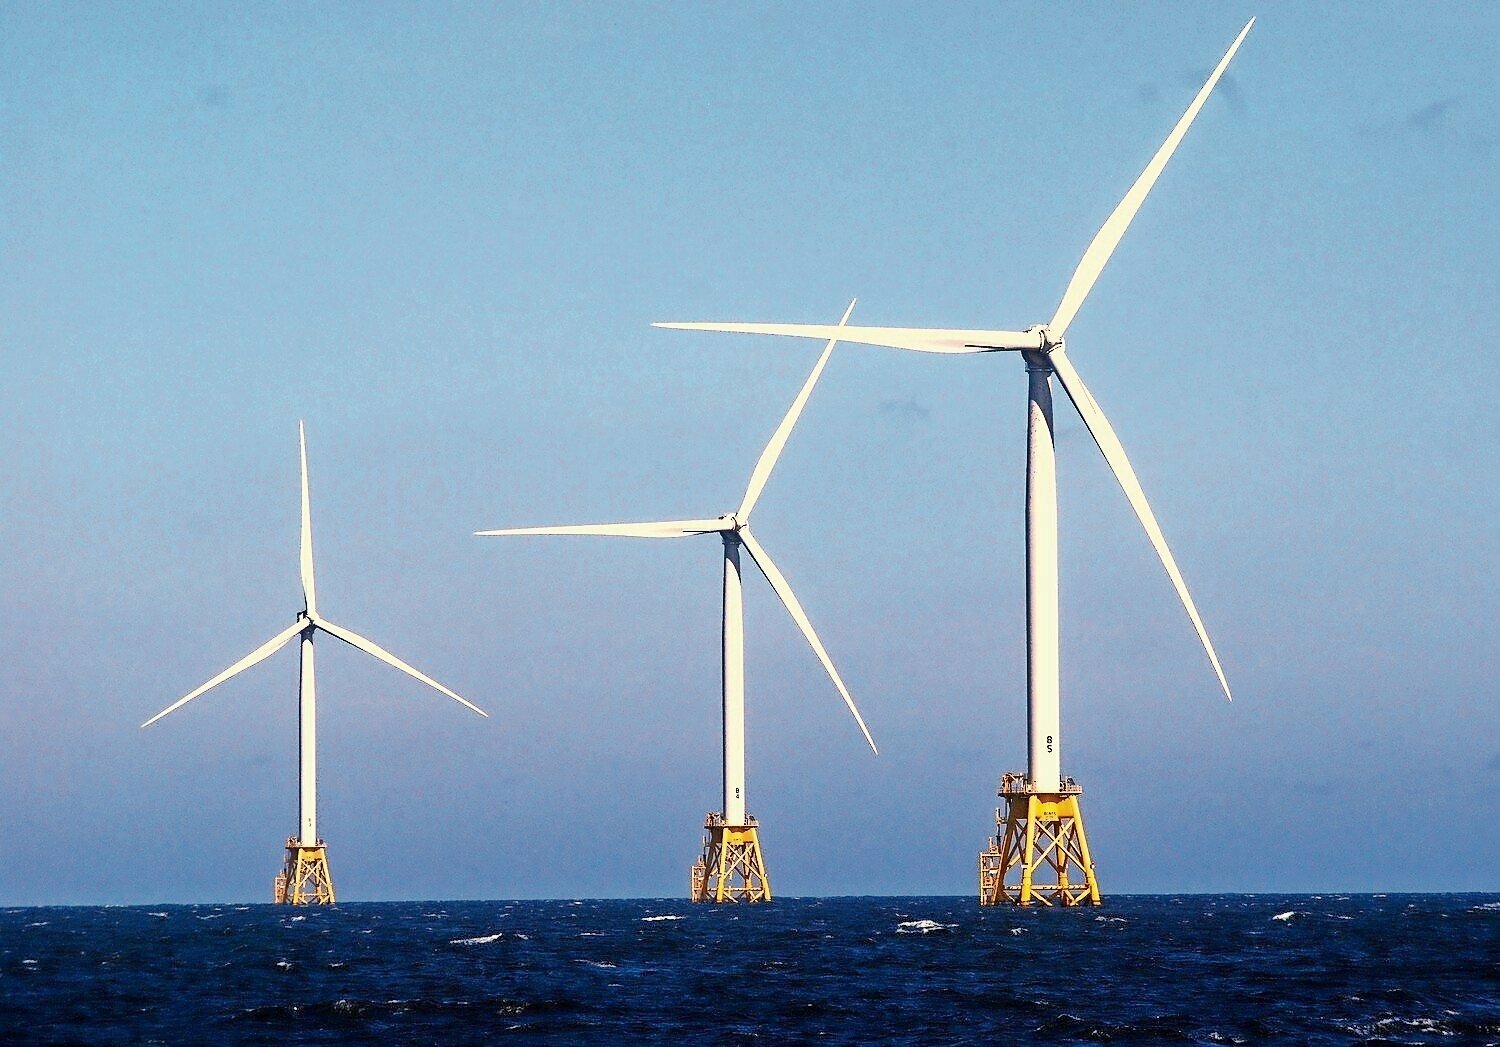 Equinor and BP's Empire Wind deal, which would've impacted Long Beach, is no more.